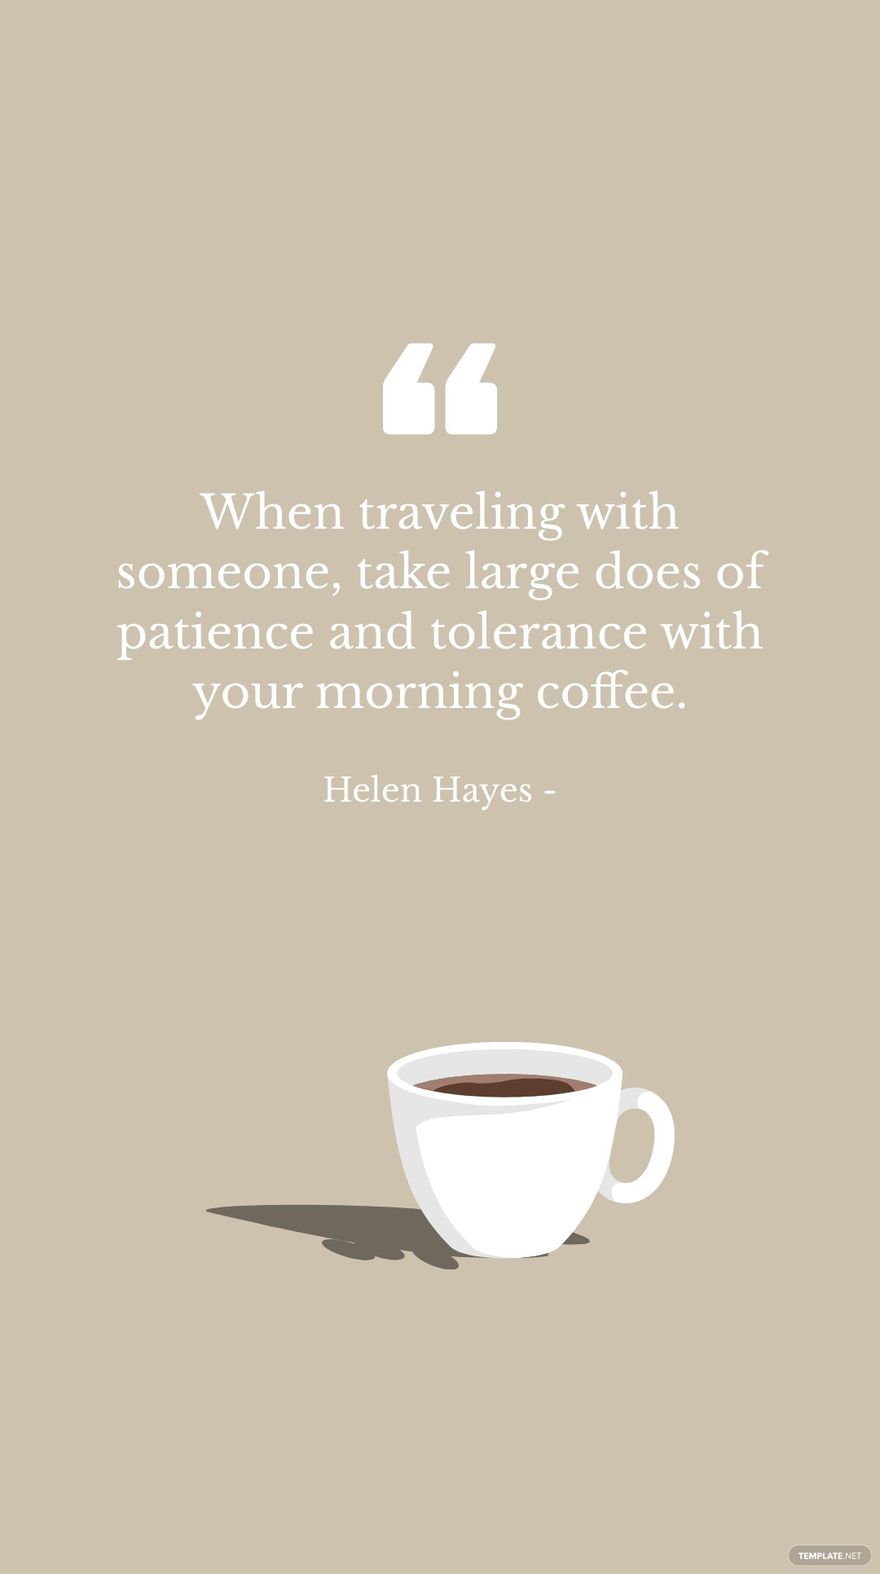 Helen Hayes - When traveling with someone, take large does of patience and tolerance with your morning coffee. in JPG